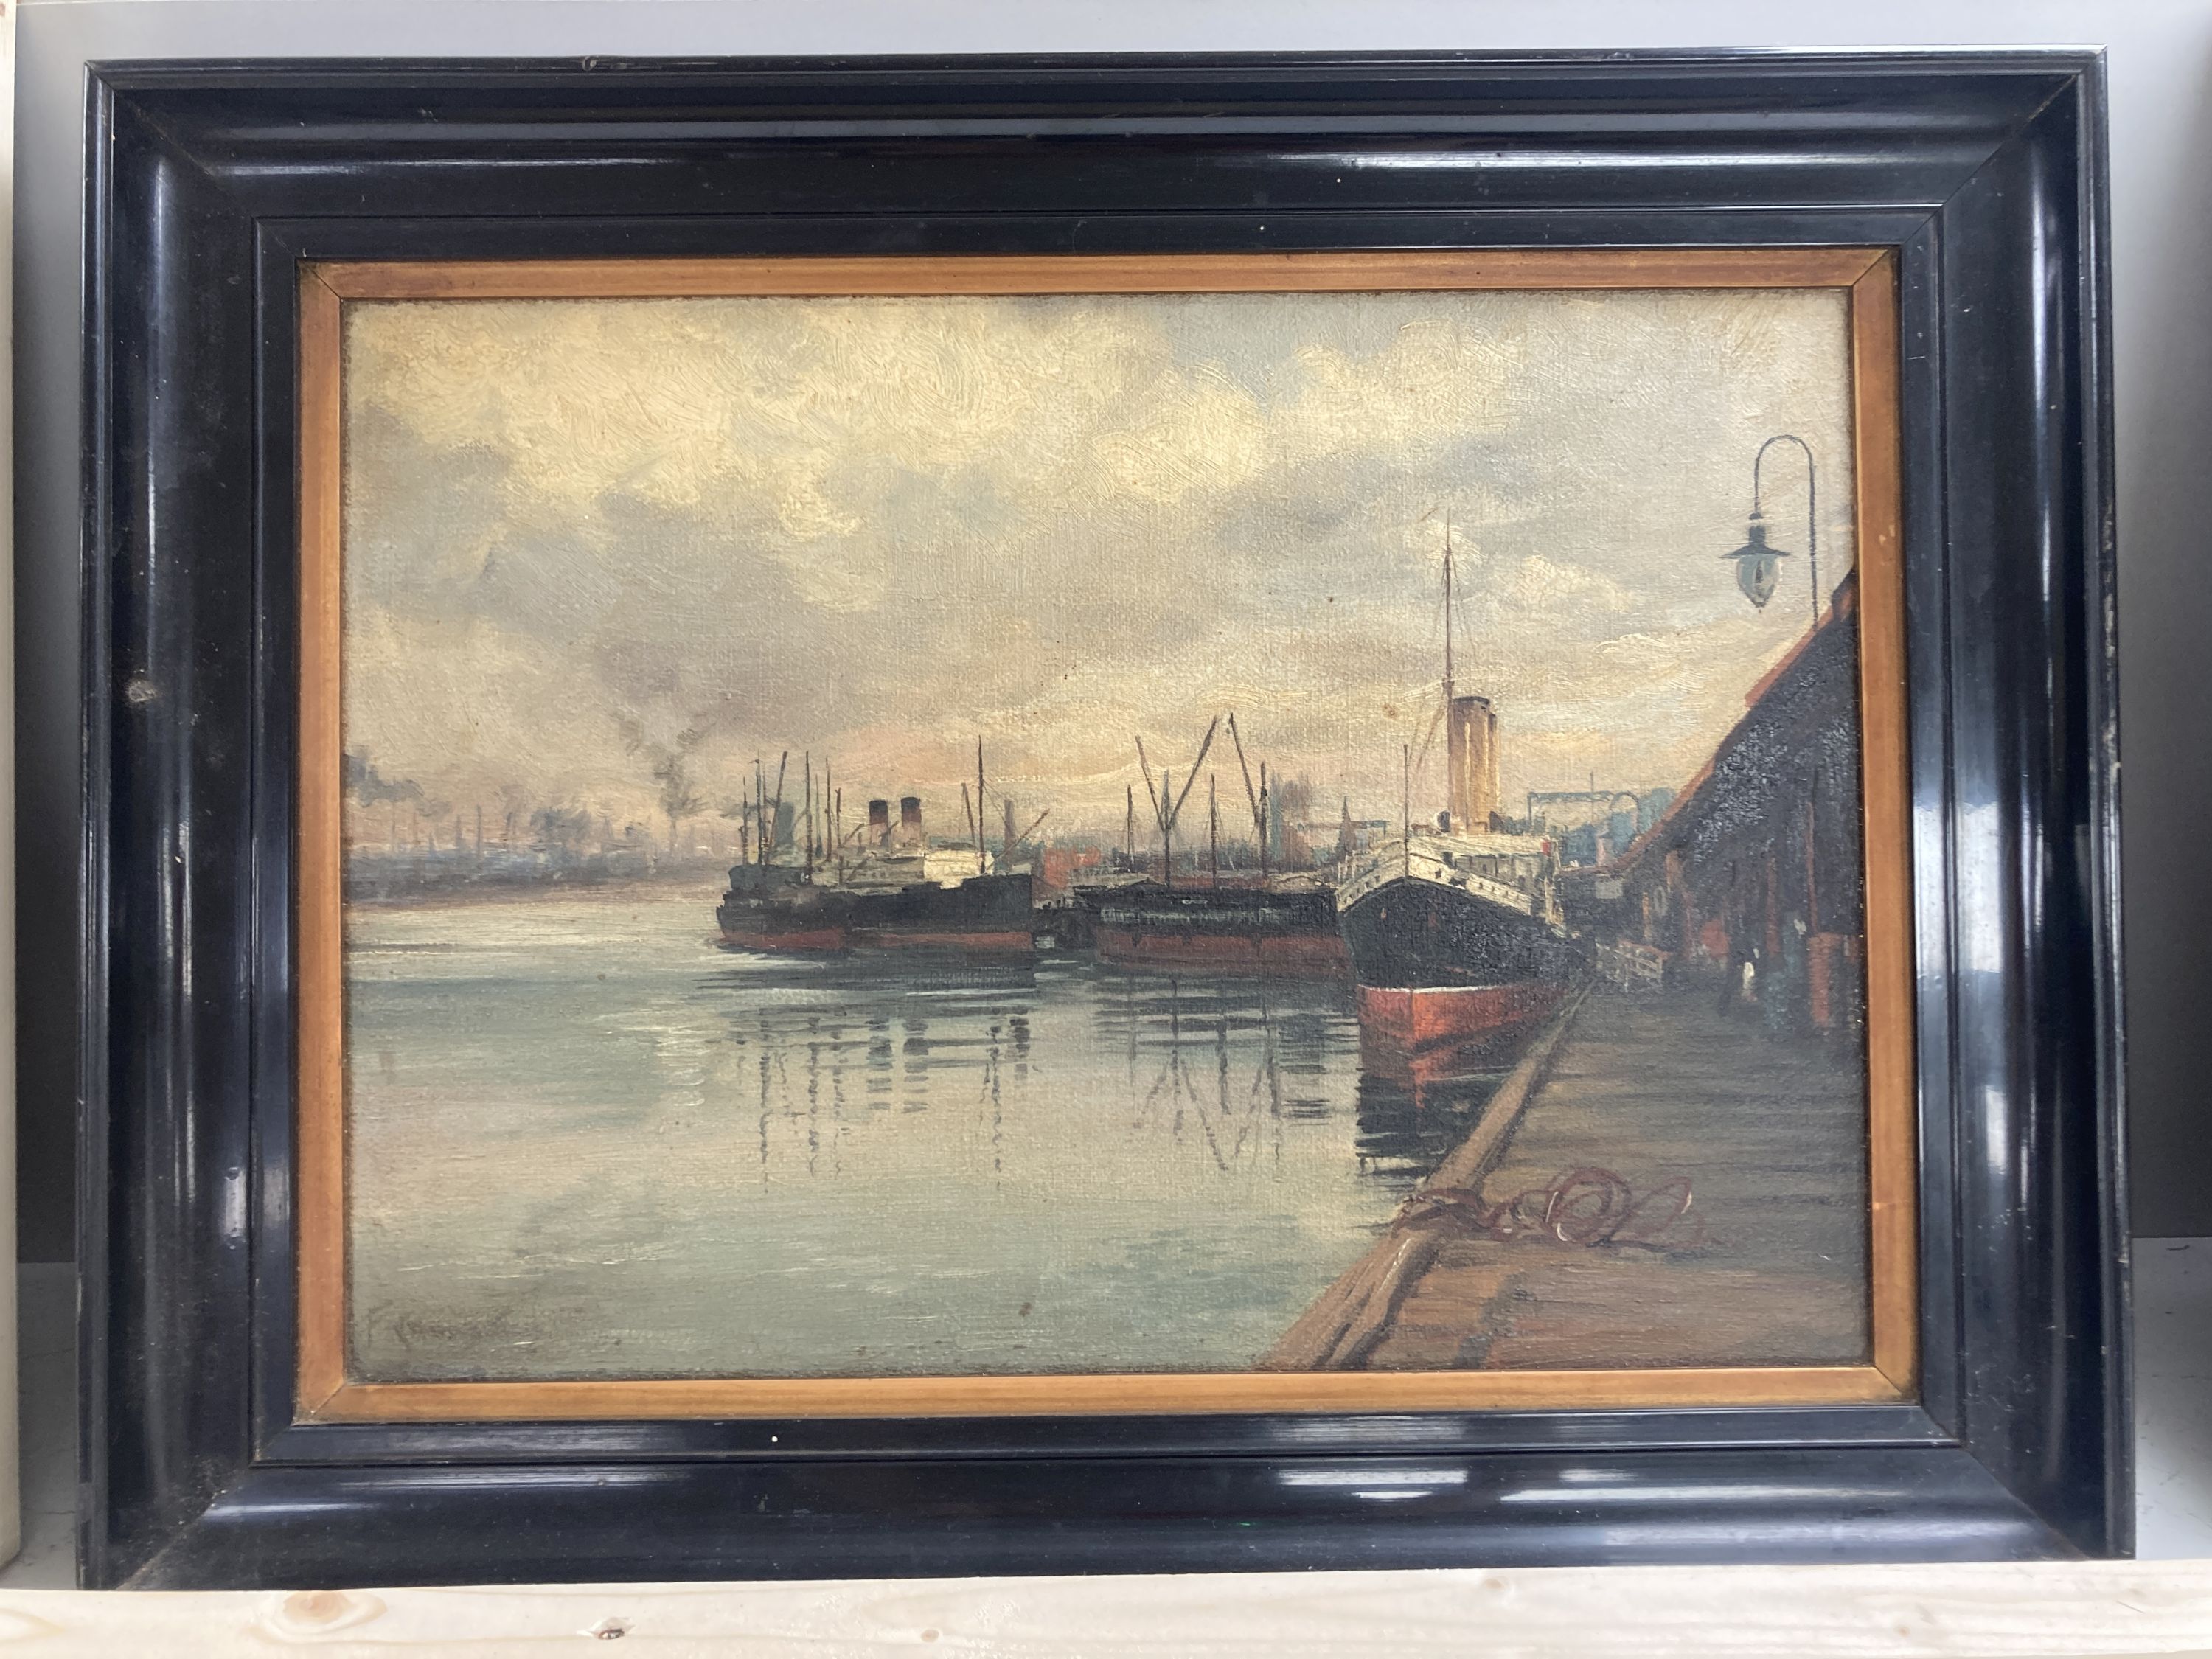 F..., oil on canvas, Shipping in harbour, indistinctly signed, 25 x 35cm